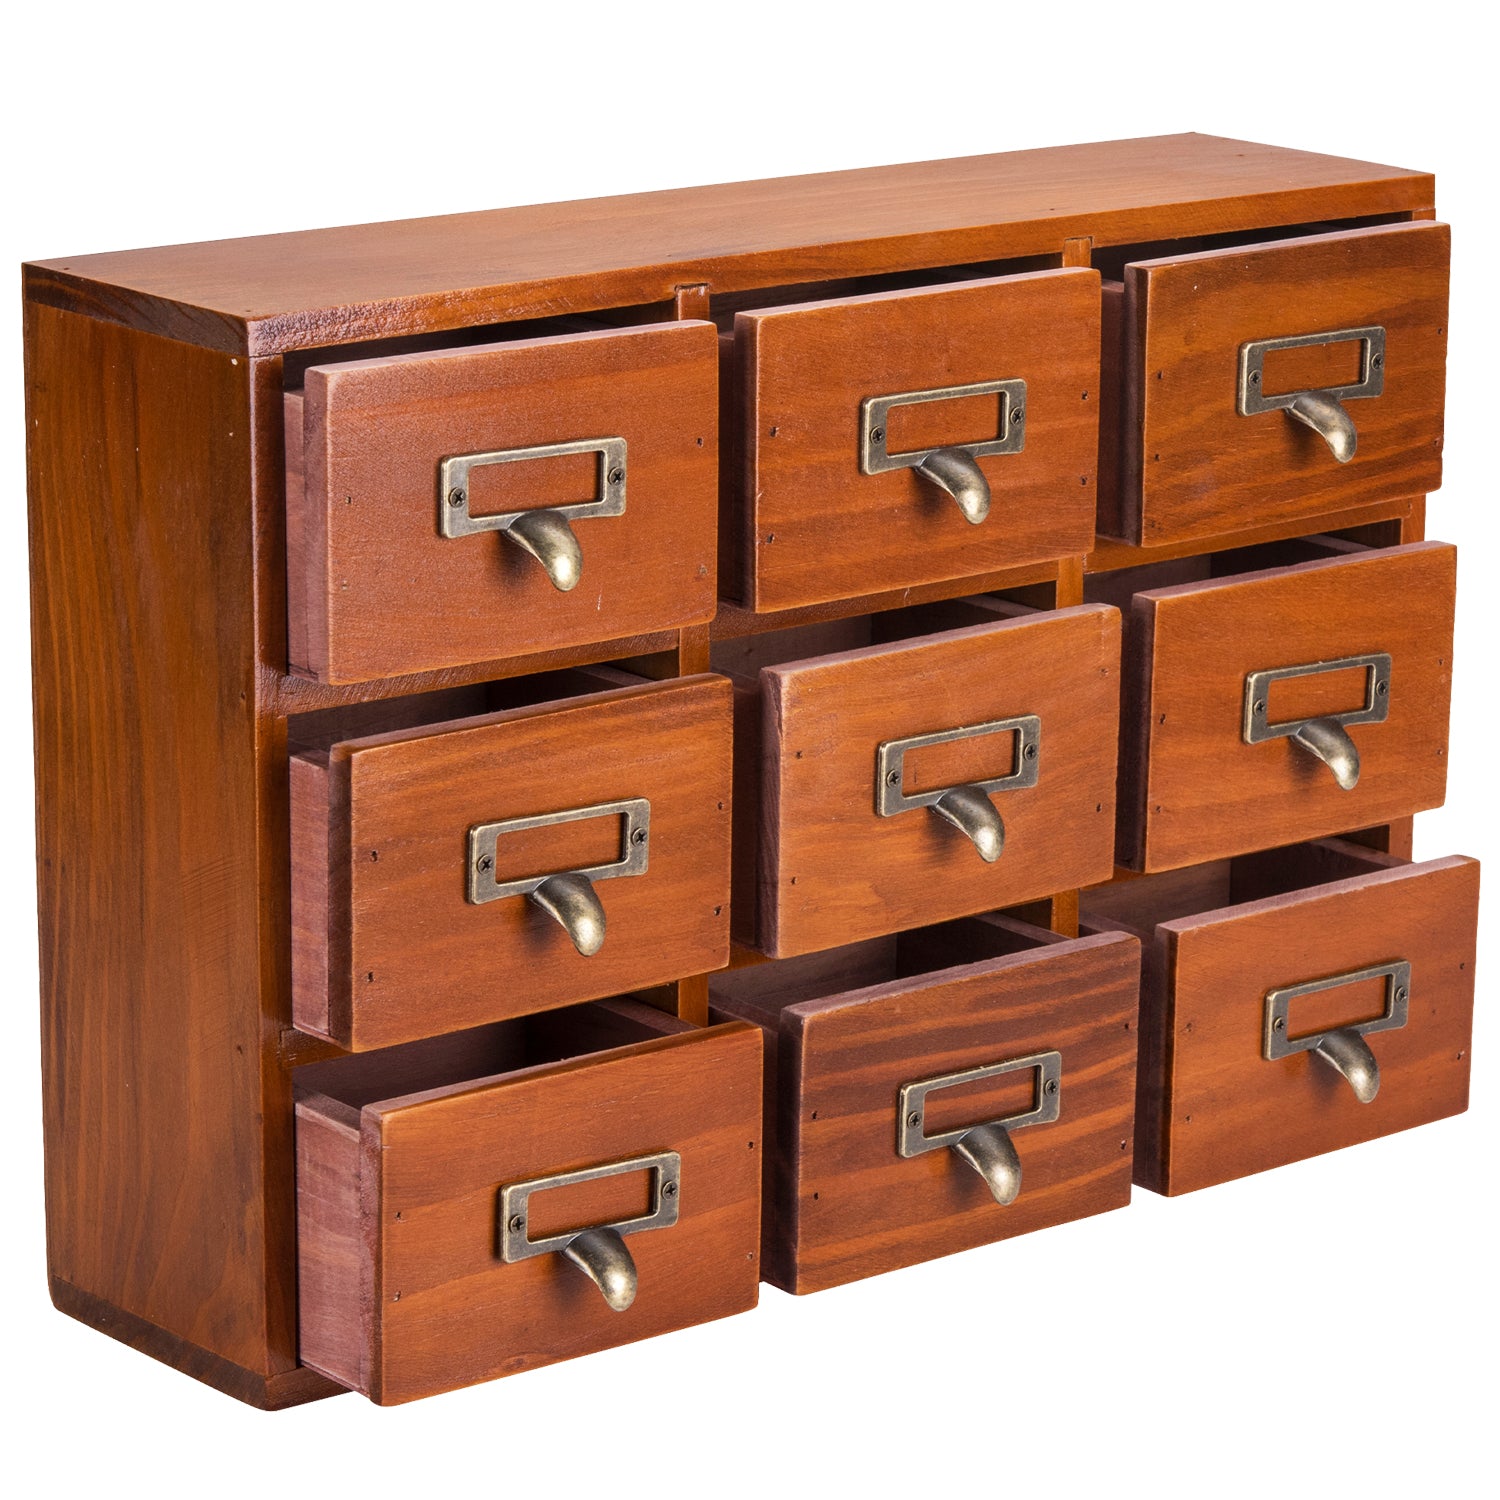 Load image into Gallery viewer, Vintage Apothecary Cabinet w/ 9 Drawers | Wooden Drawer Organizer for Desktop Table Top